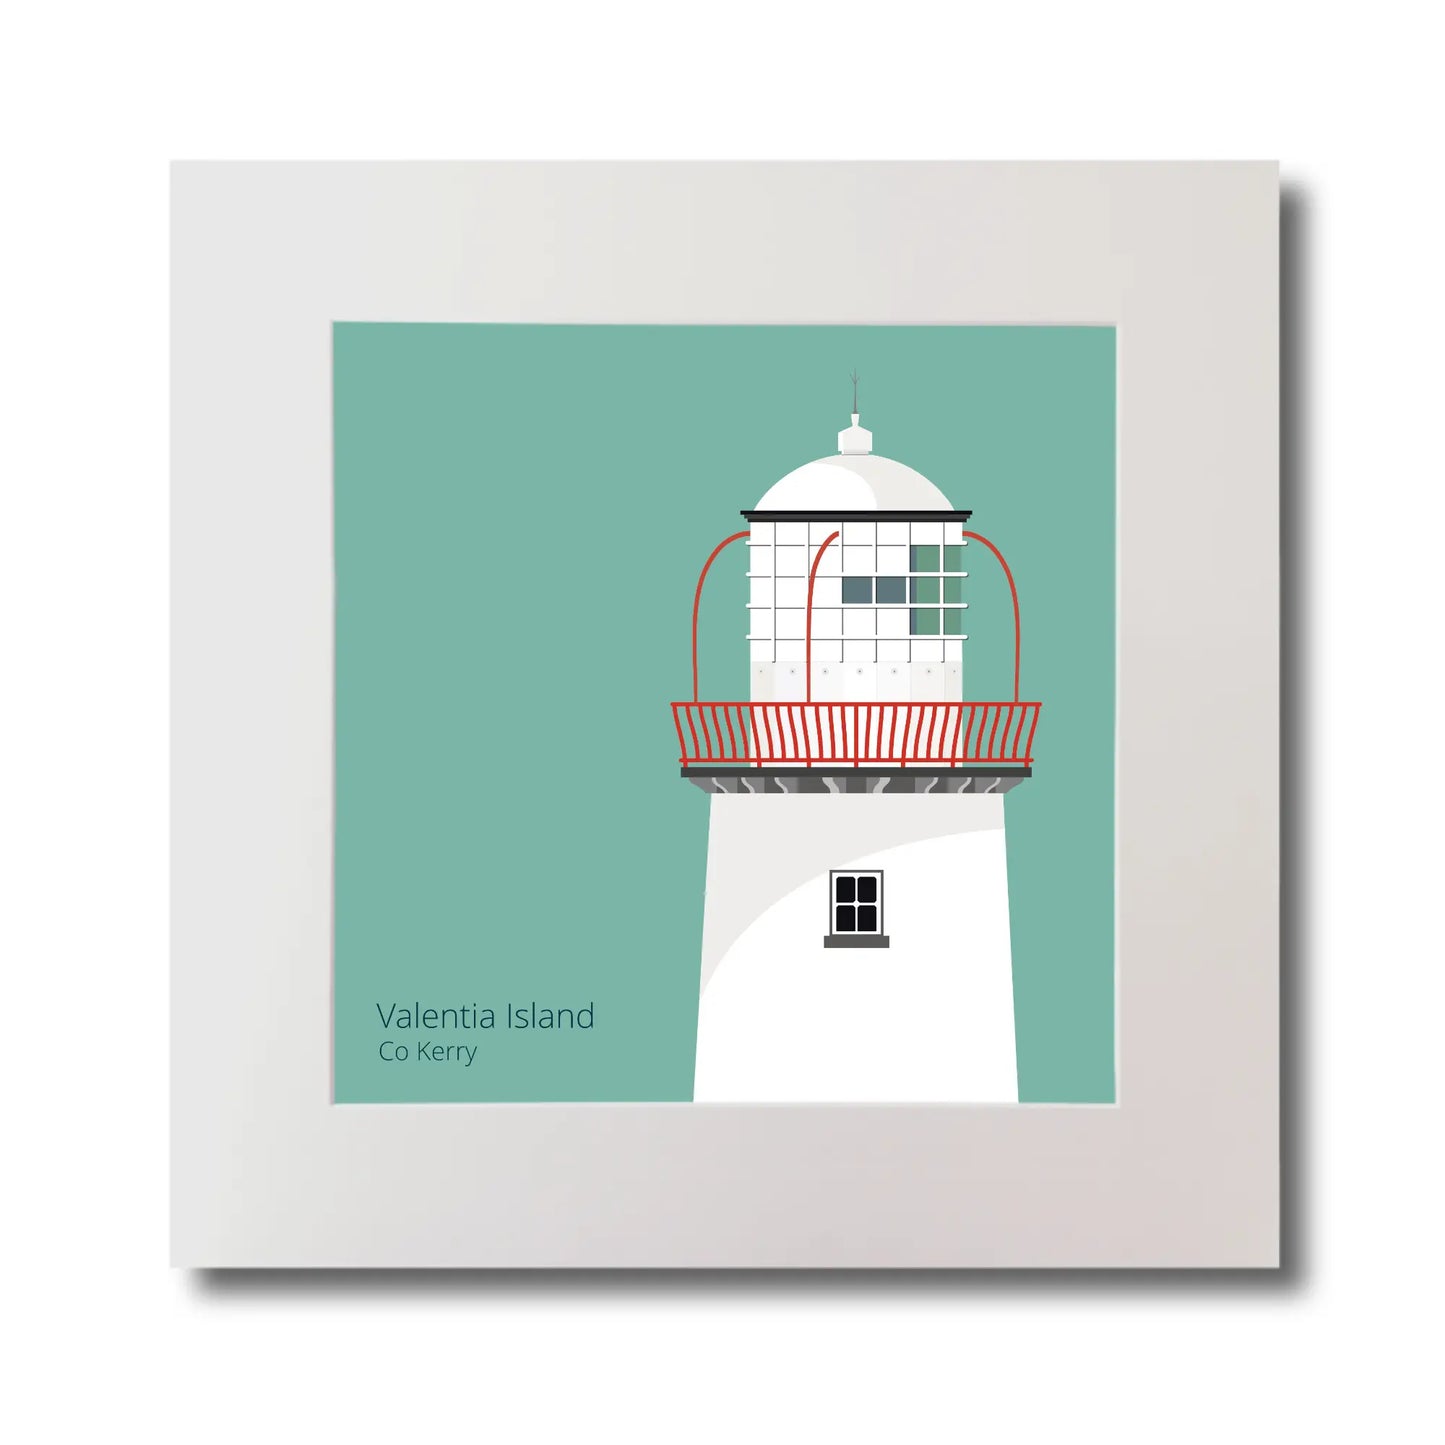 Illustration of Valentia Island lighthouse on an ocean green background, mounted and measuring 30x30cm.